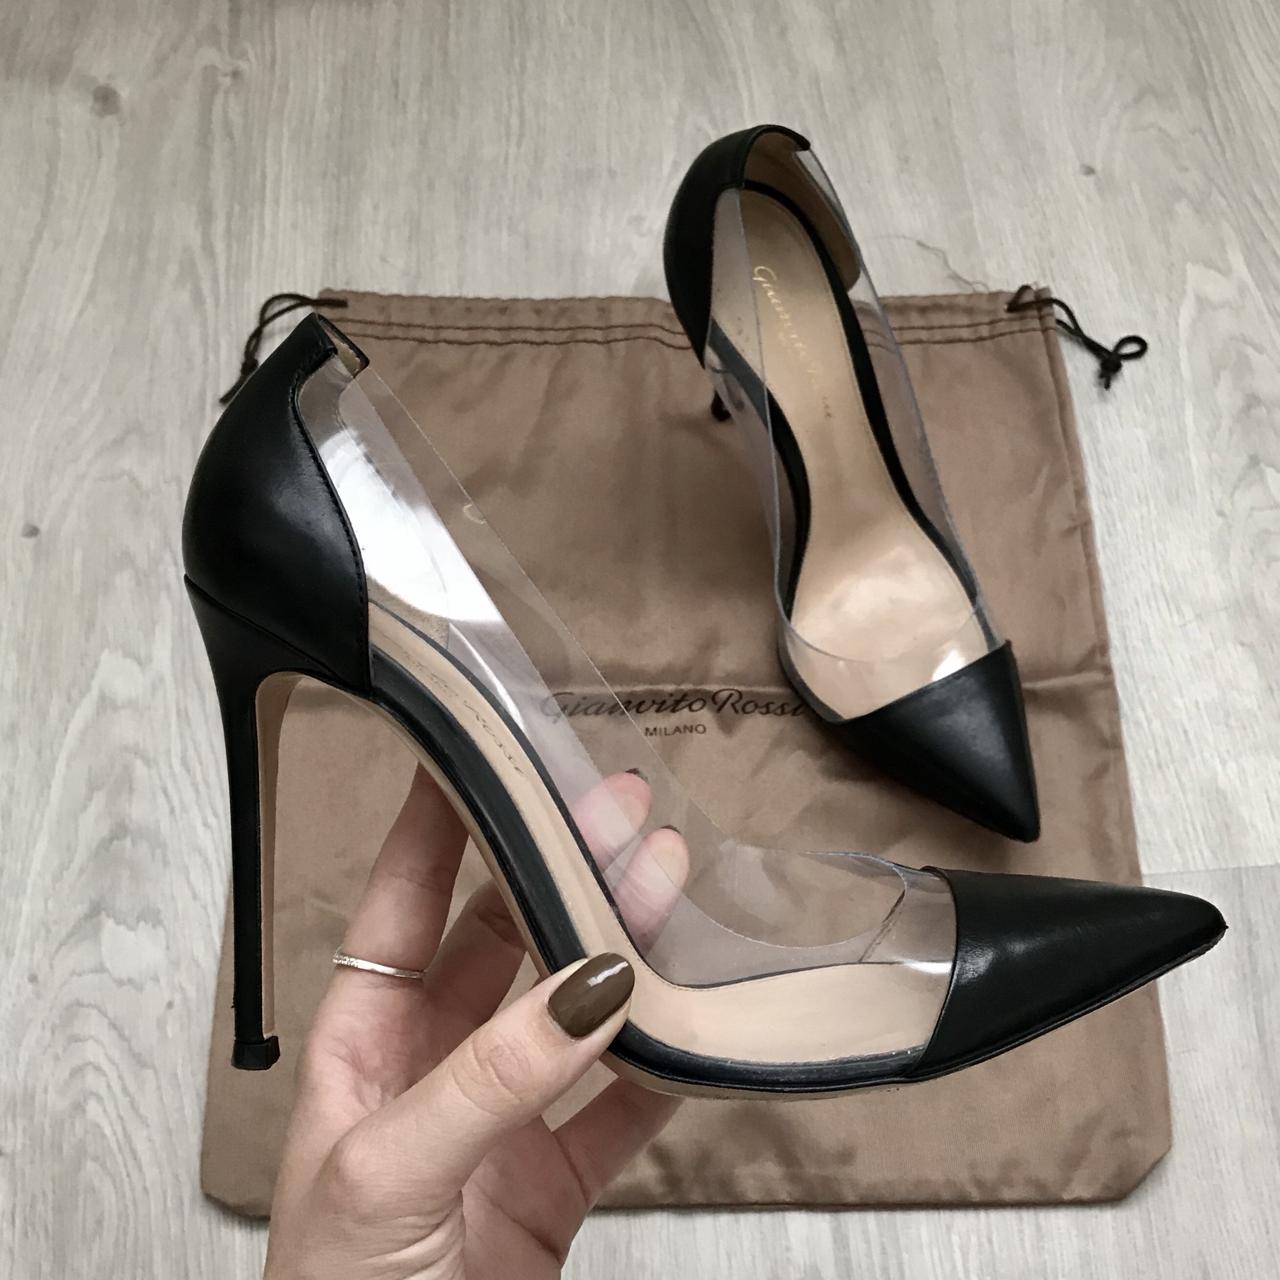 Gianvito Rossi Plexi pumps. Size 37 and they fits... - Depop